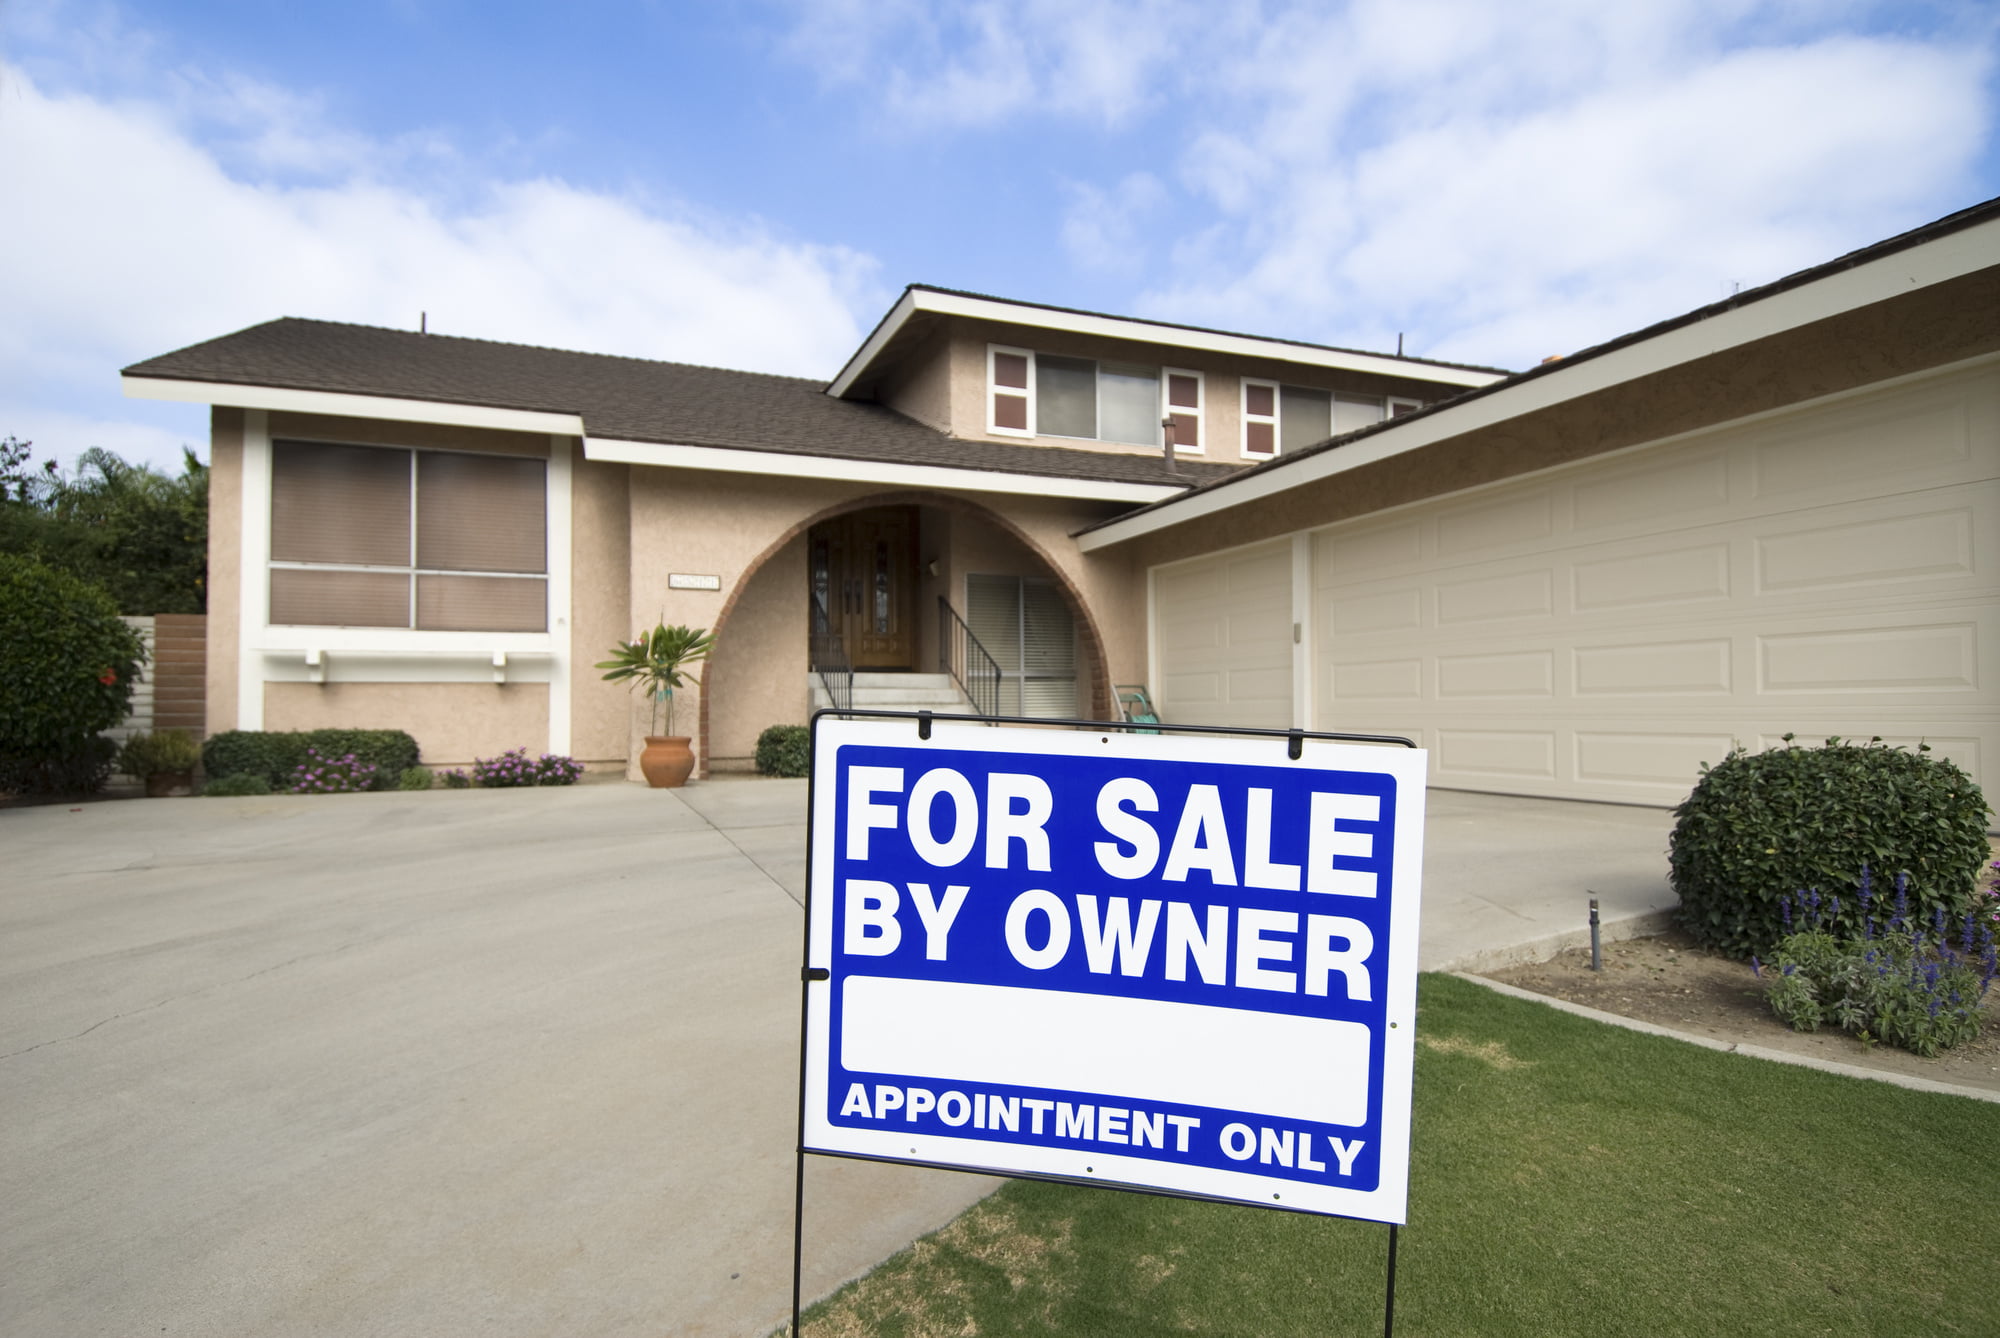 Are you puzzled over the fastest, most profitable way to sell your home? Find out the pros and cons of FSBO vs realtor home sales here.